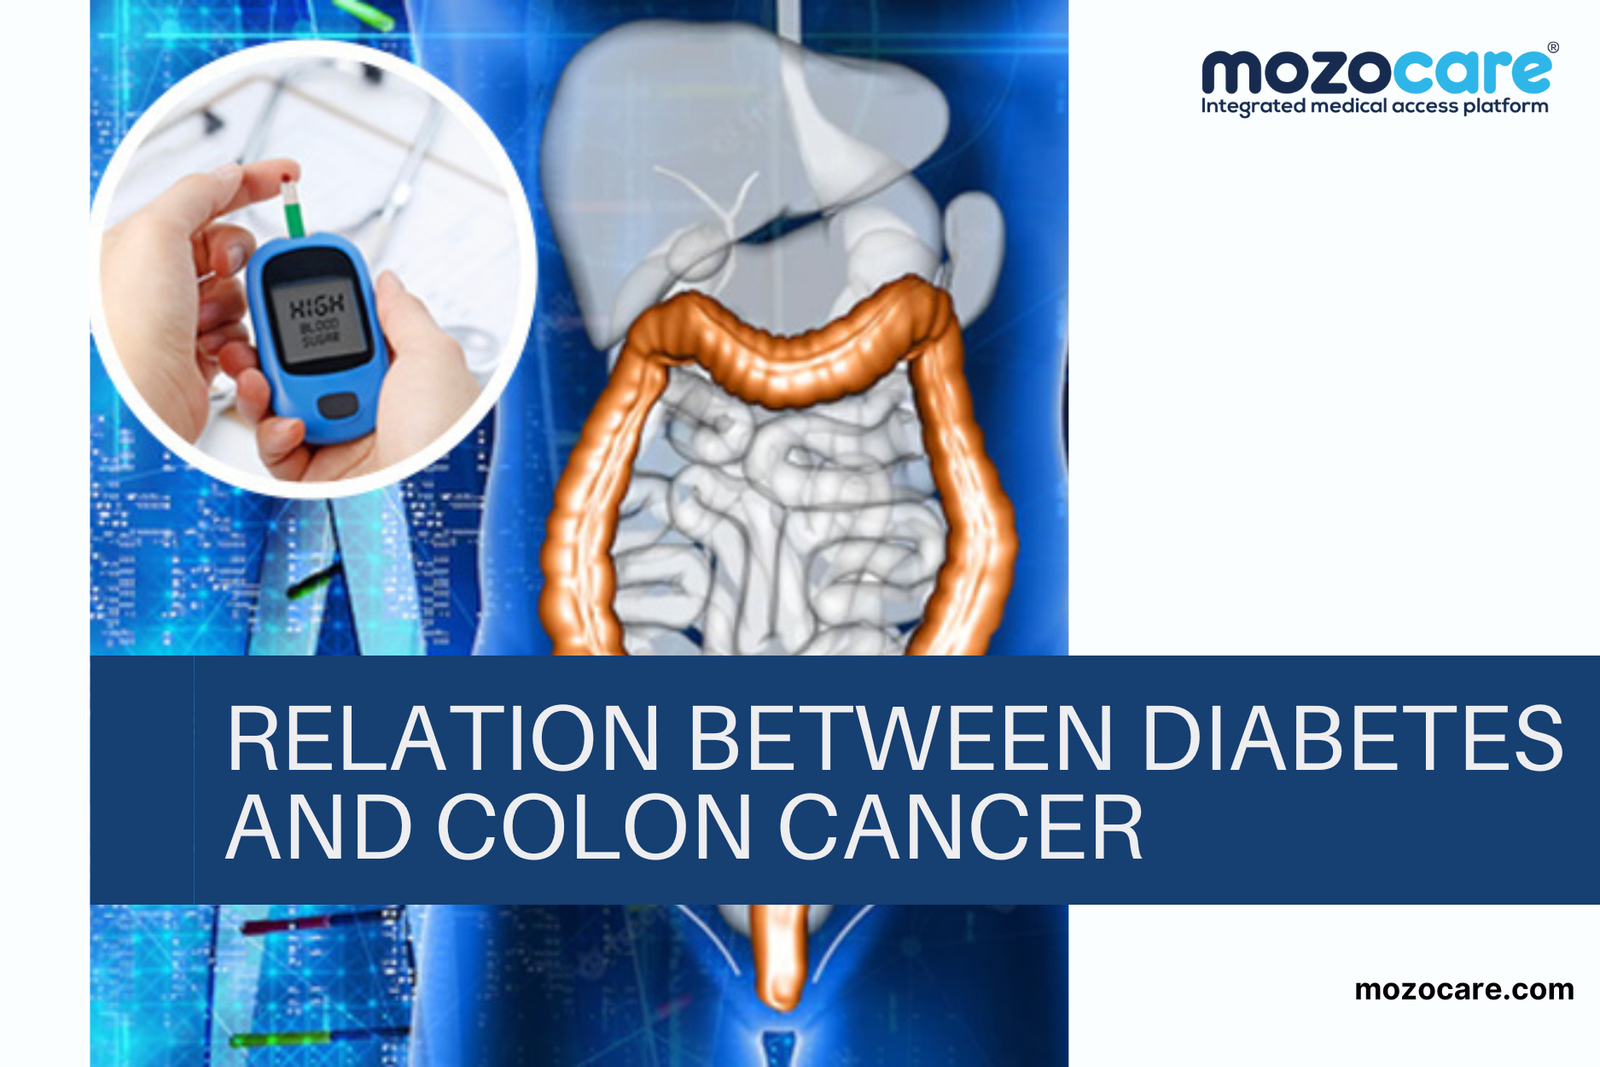 Relationship Between Diabetes and Colorectal Cancer